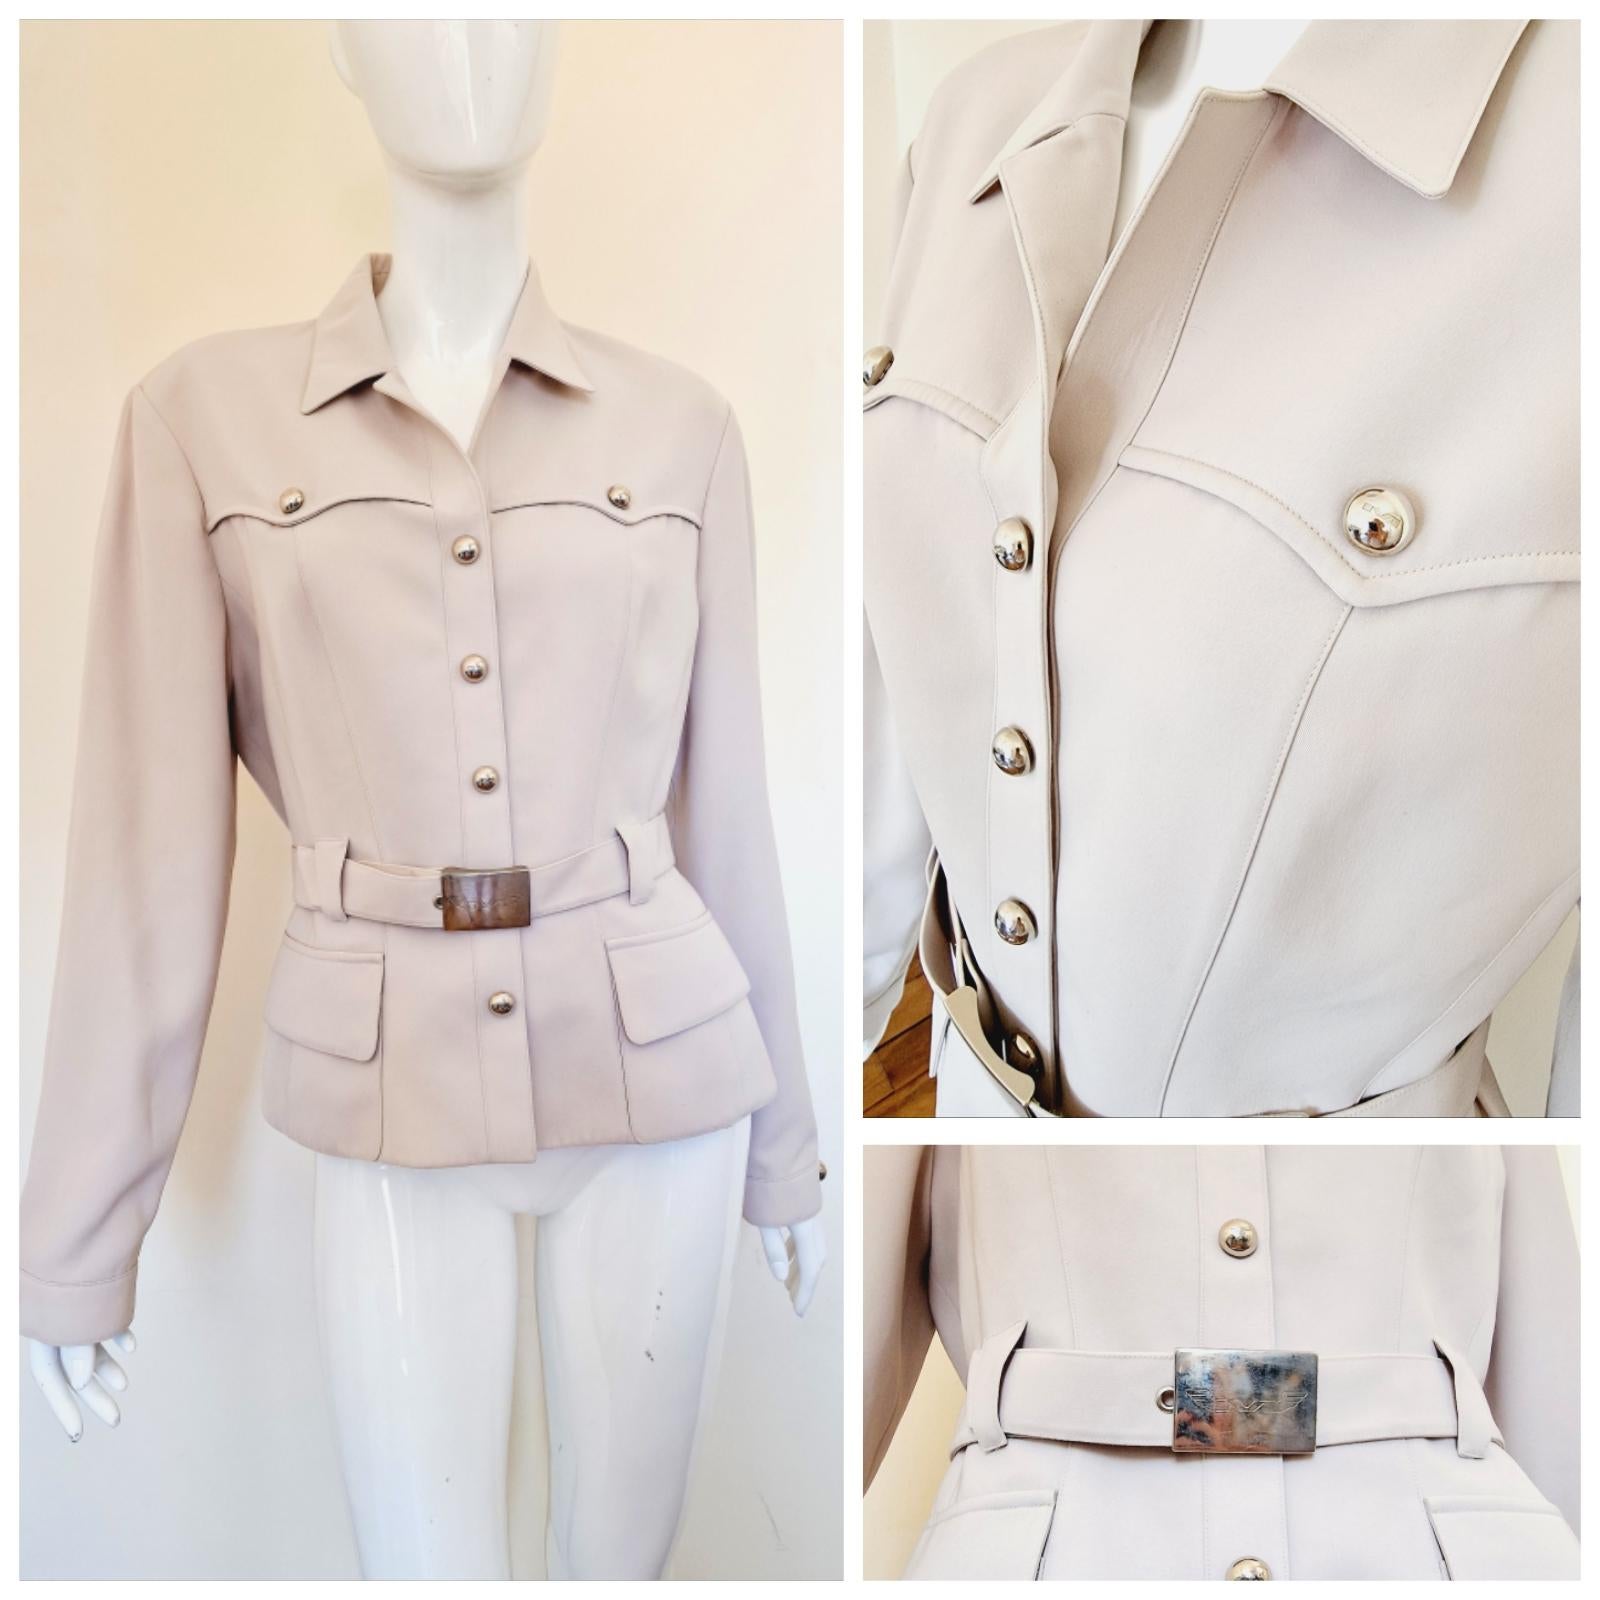 Beautiful piece by Thierry Mugler!
with shoulder pads!
Wonderful silhouette!
Wasp Waist look.
MUGLER metal belt!
Saharan stlye!

VERY GOOD Condition.

SIZE
Medium.
No size label. 
Length: 59 cm / 23.2 inch
Armpit to armpit: 45 cm / 17.7 inch
Waist: